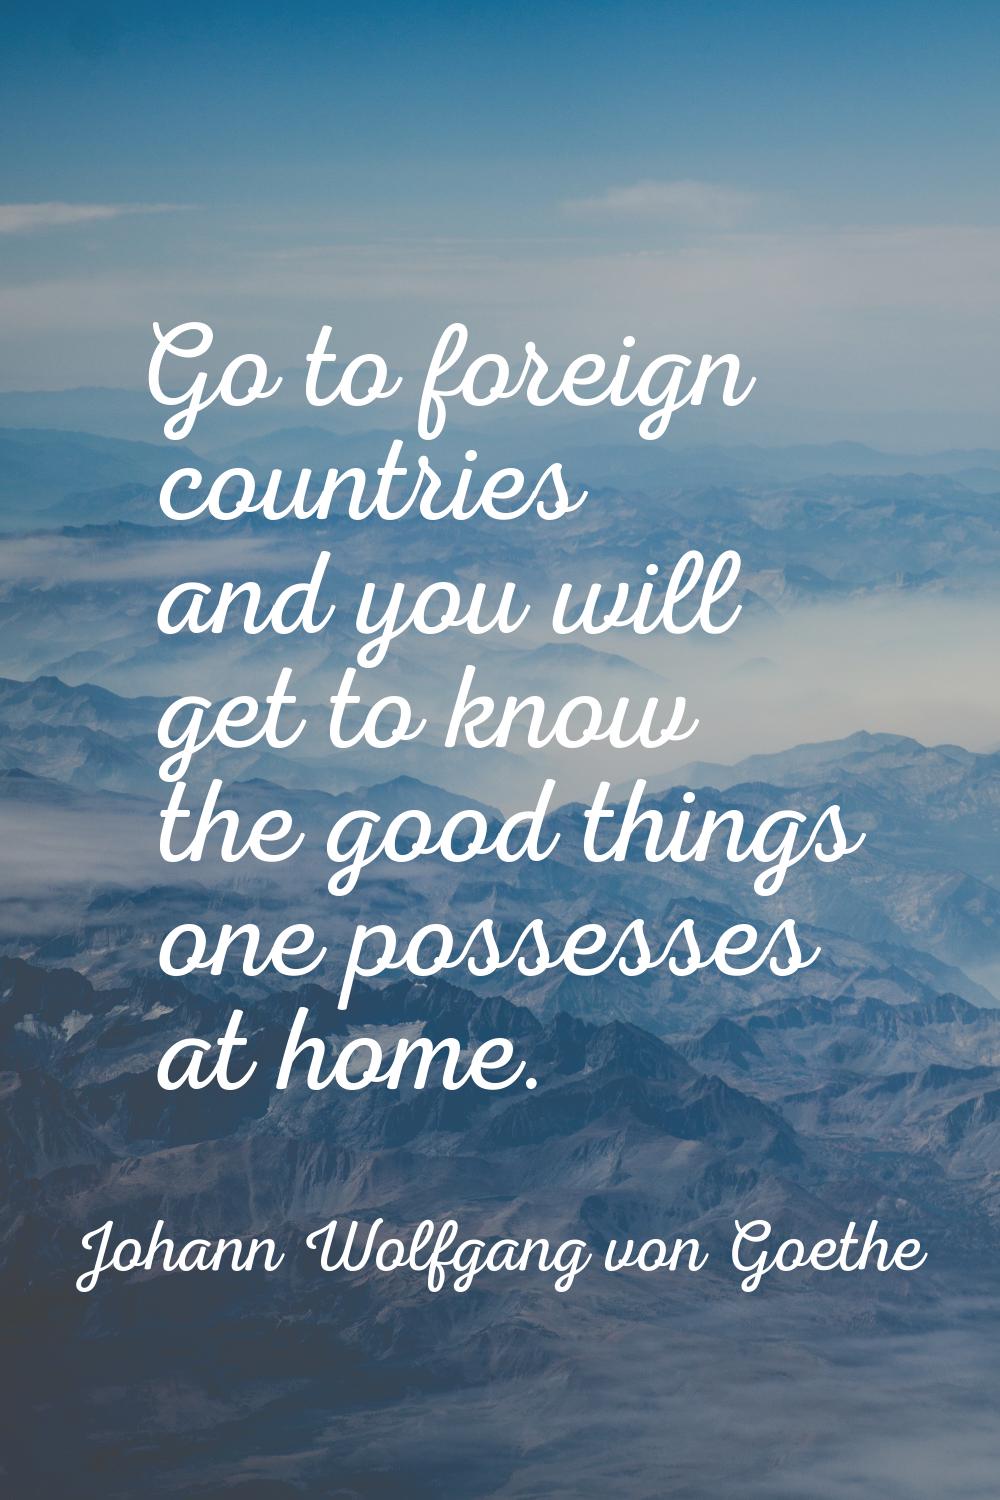 Go to foreign countries and you will get to know the good things one possesses at home.